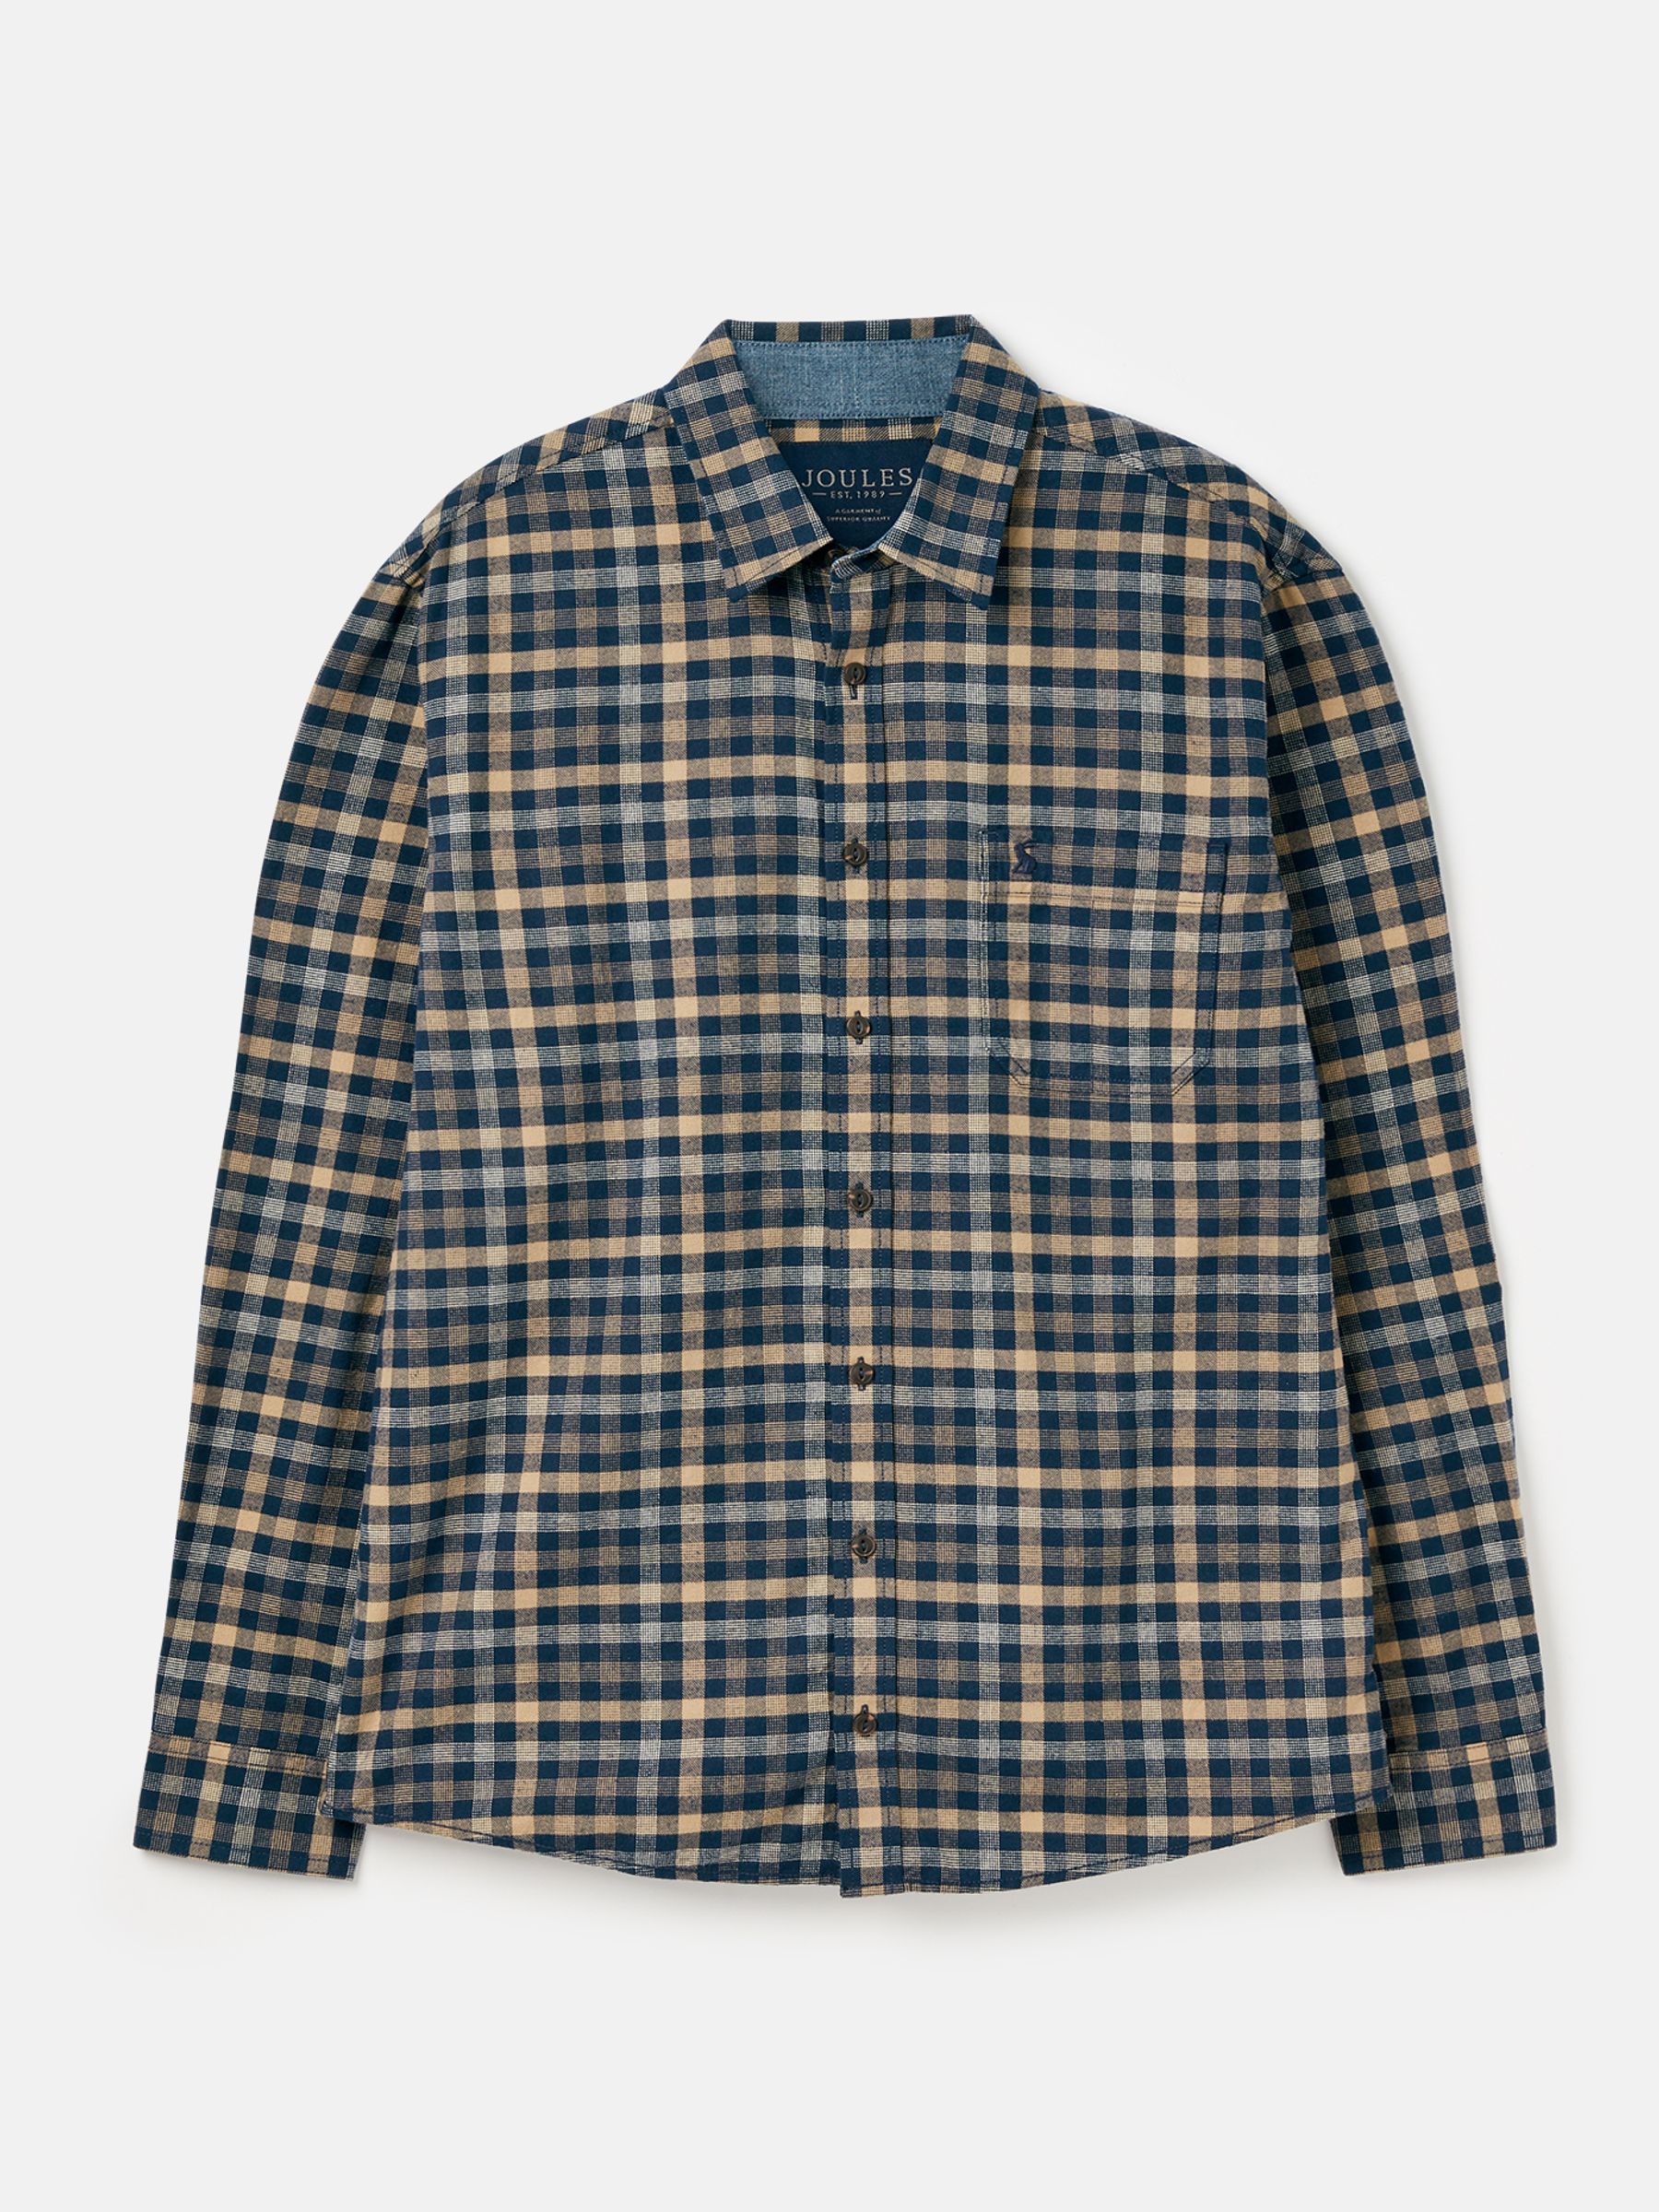 Buy Joules Buchannan Check Shirt from the Joules online shop